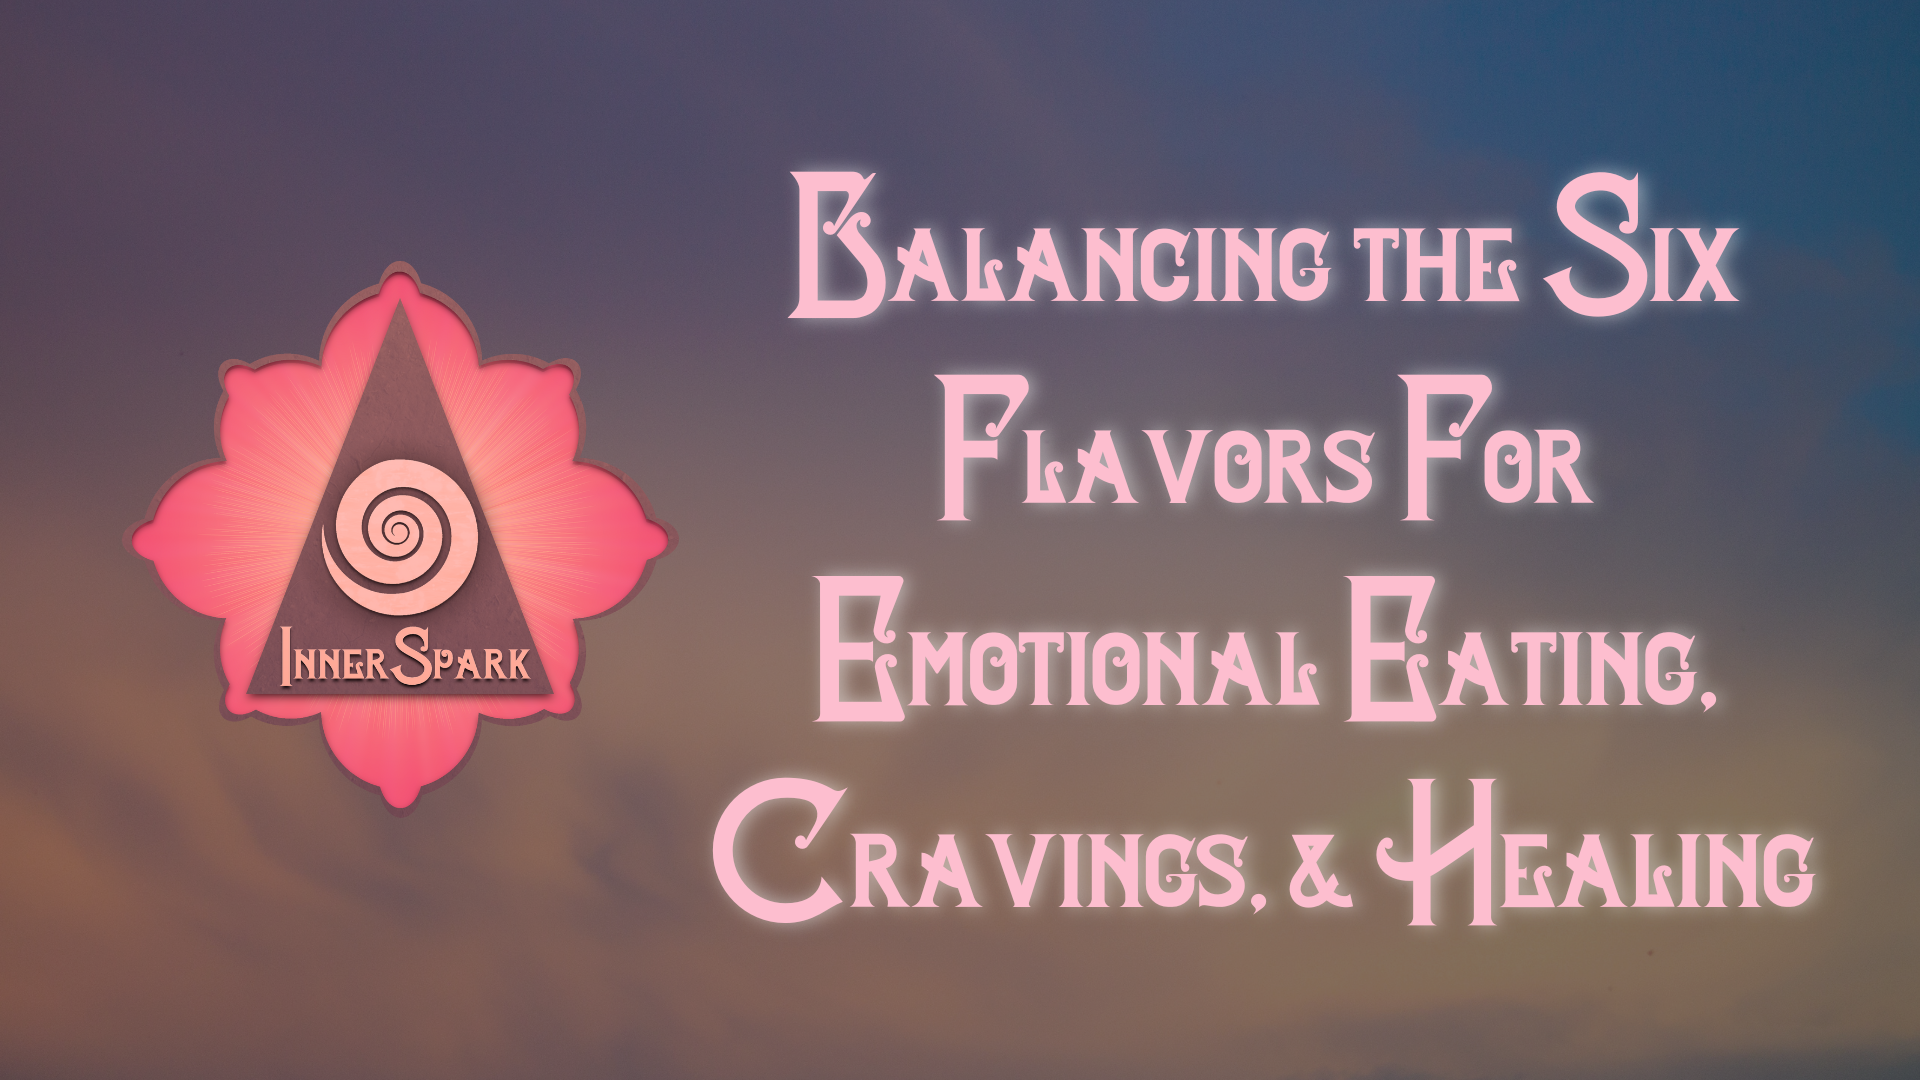 Balancing the Six Flavors For Emotional Eating, Cravings, & Healing